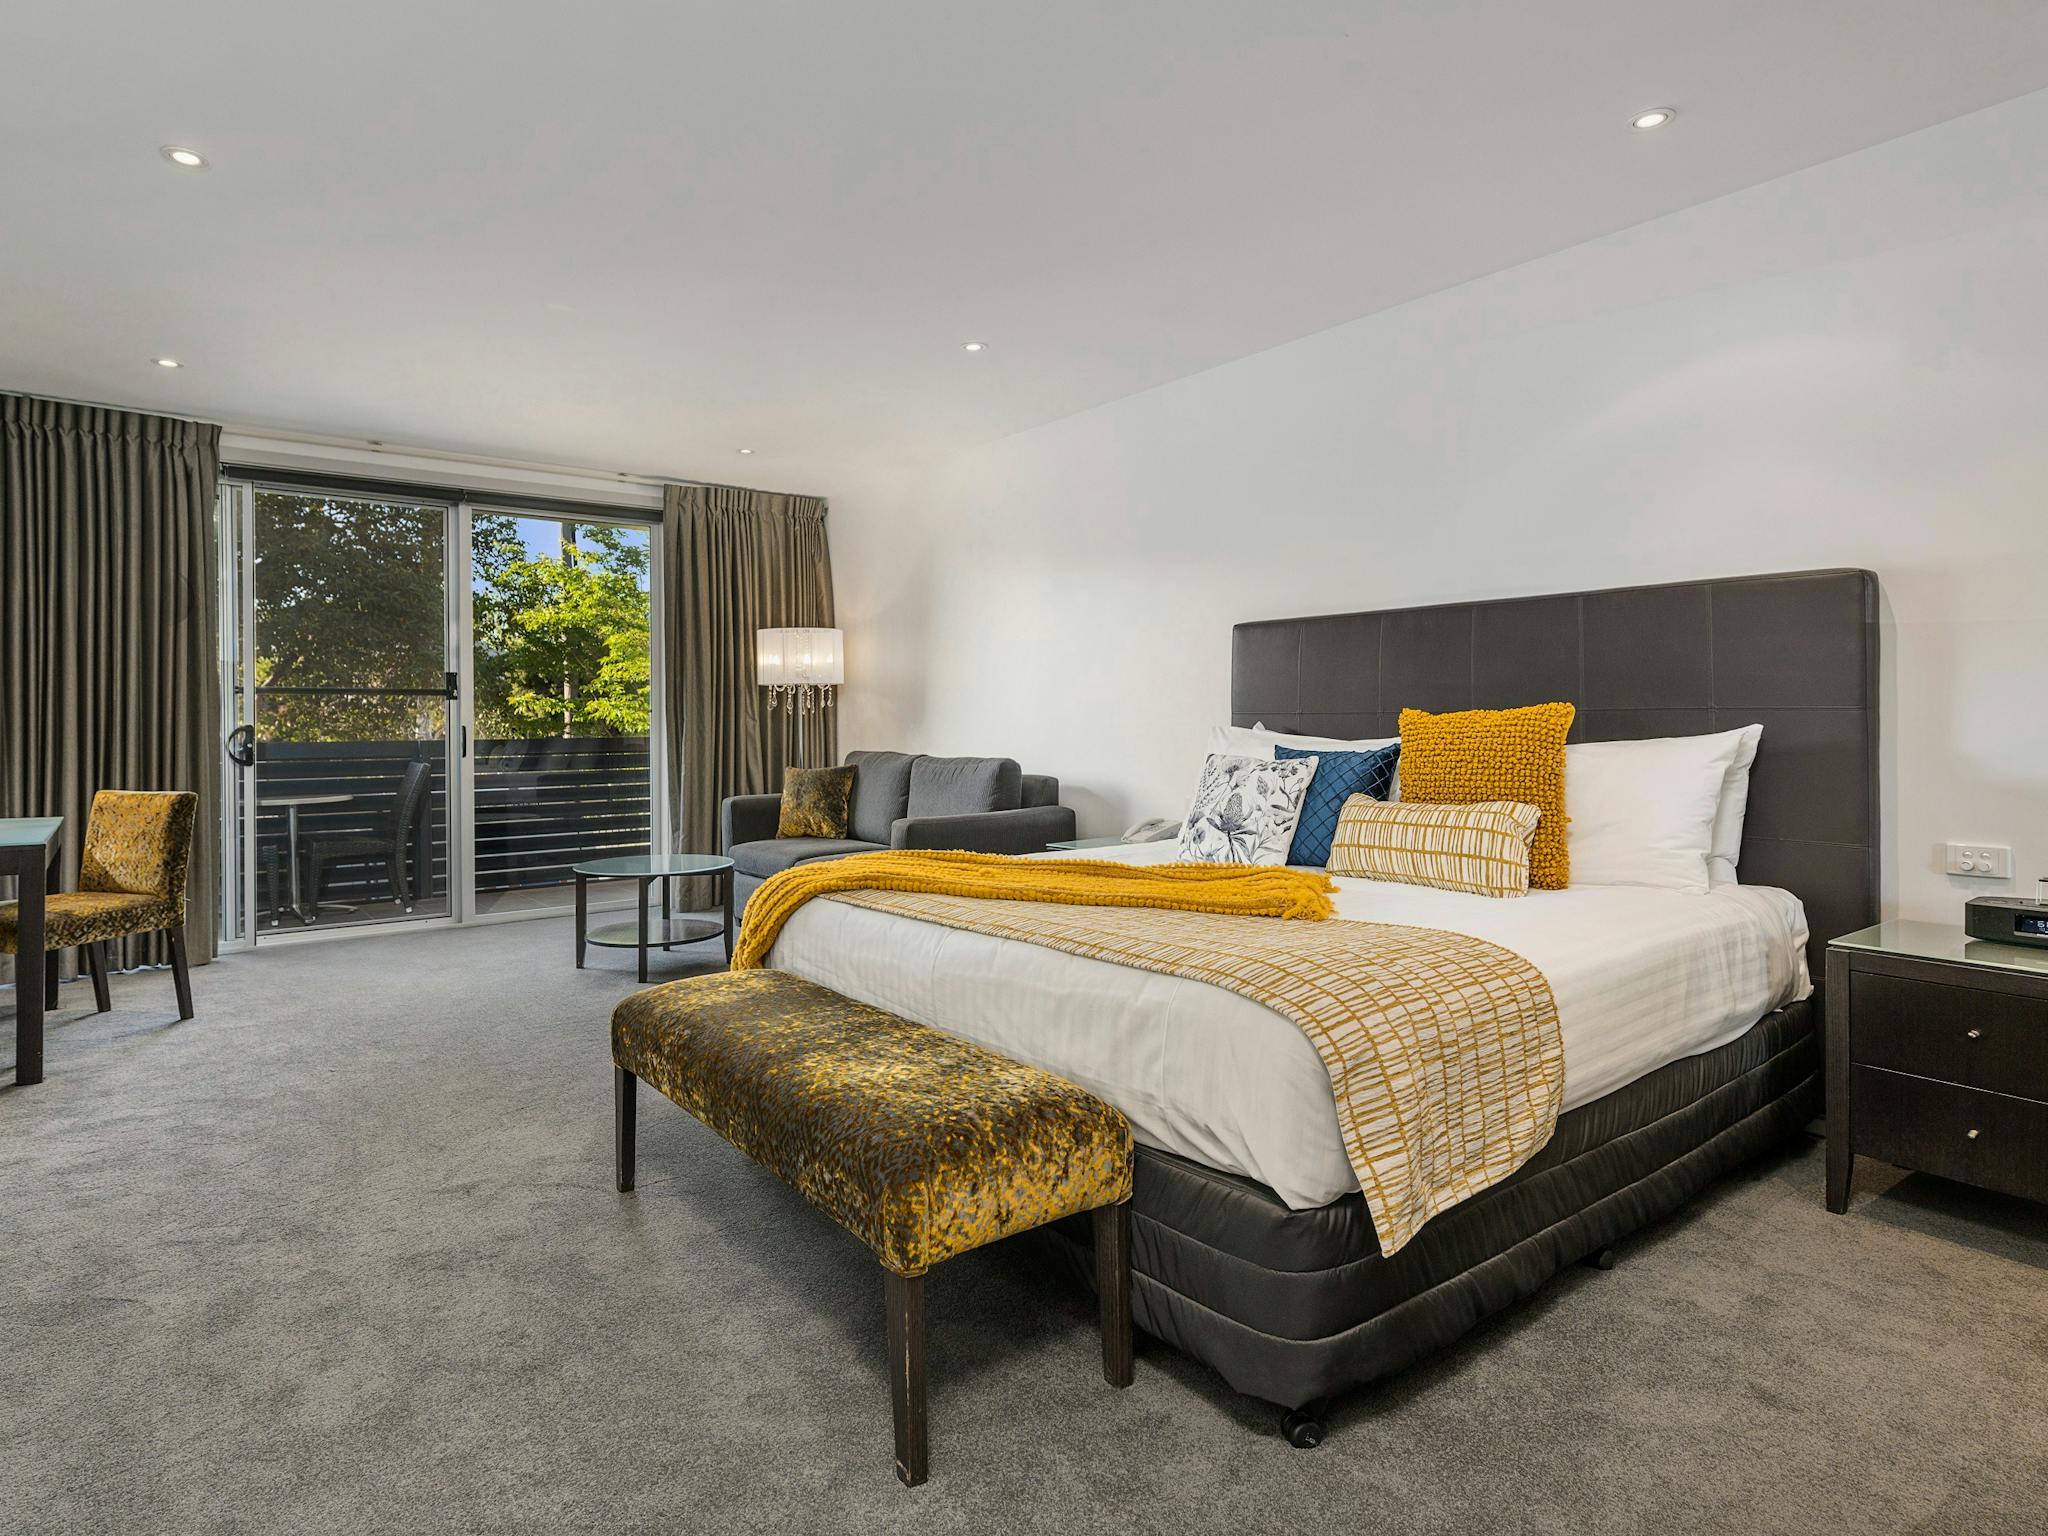 he Gateway's King Suites offer views of treetops from your private balcony